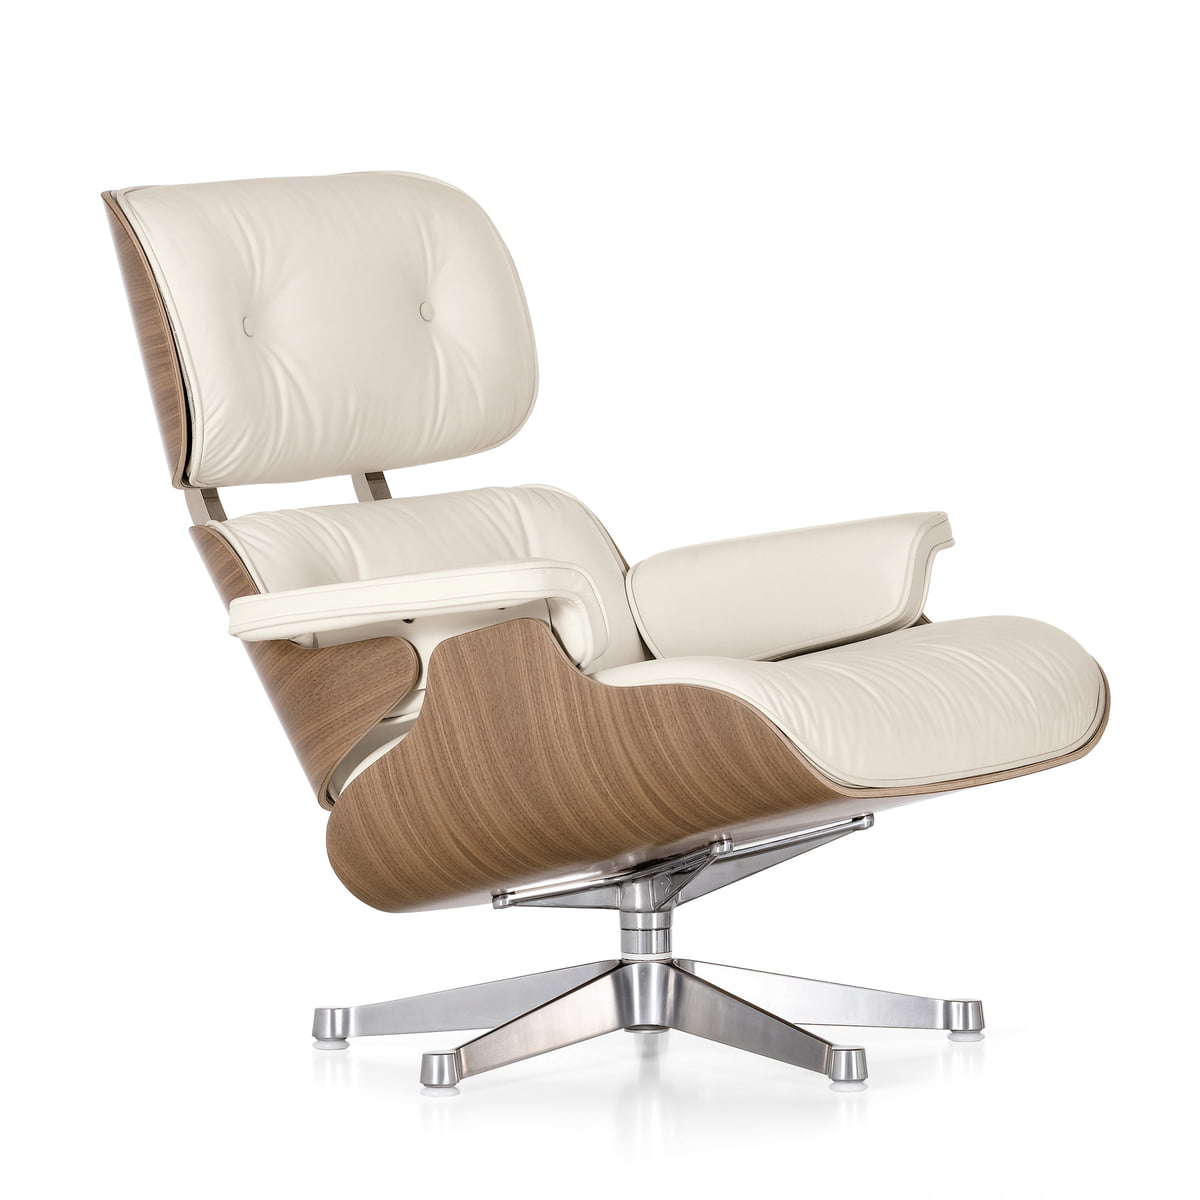 Vitra Lounge Chair in white in the shop